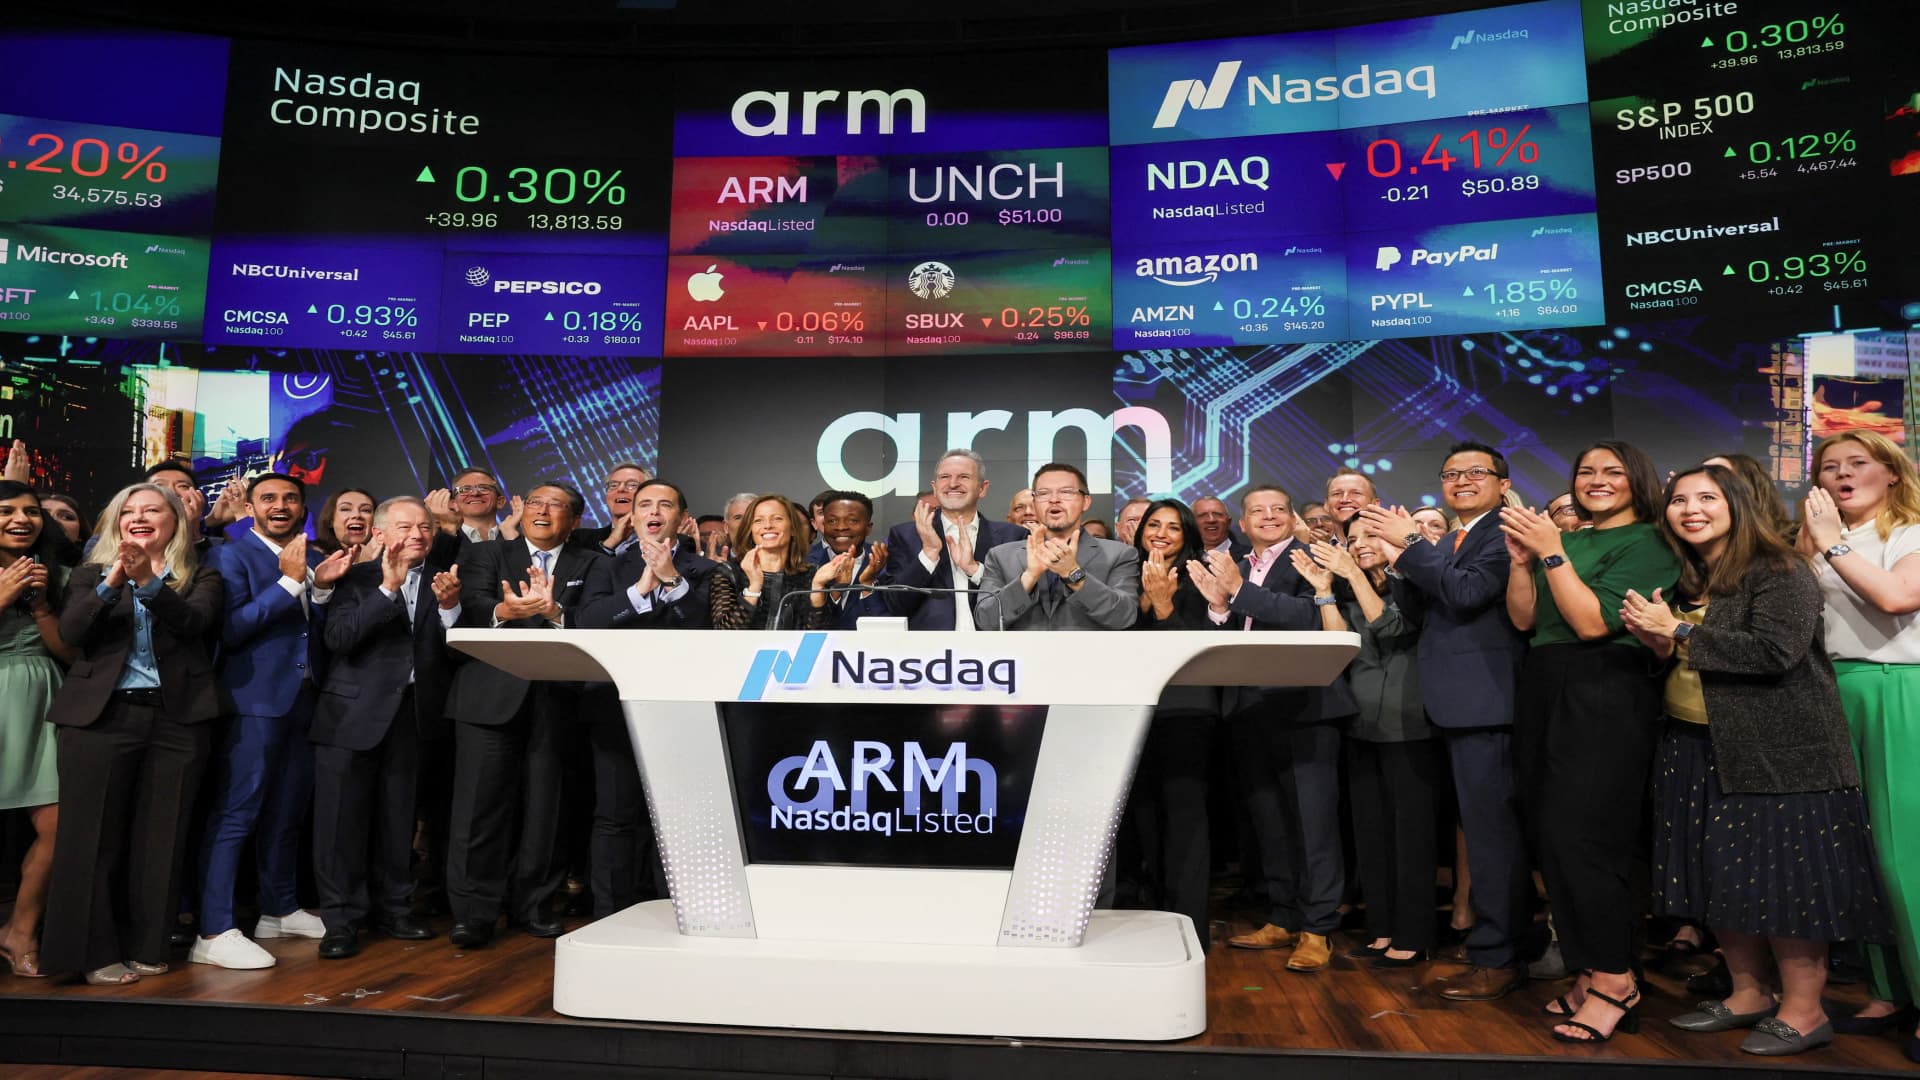 Arm debut will help jump-start IPO market, early Airbnb investor Rick Heitzmann suggests